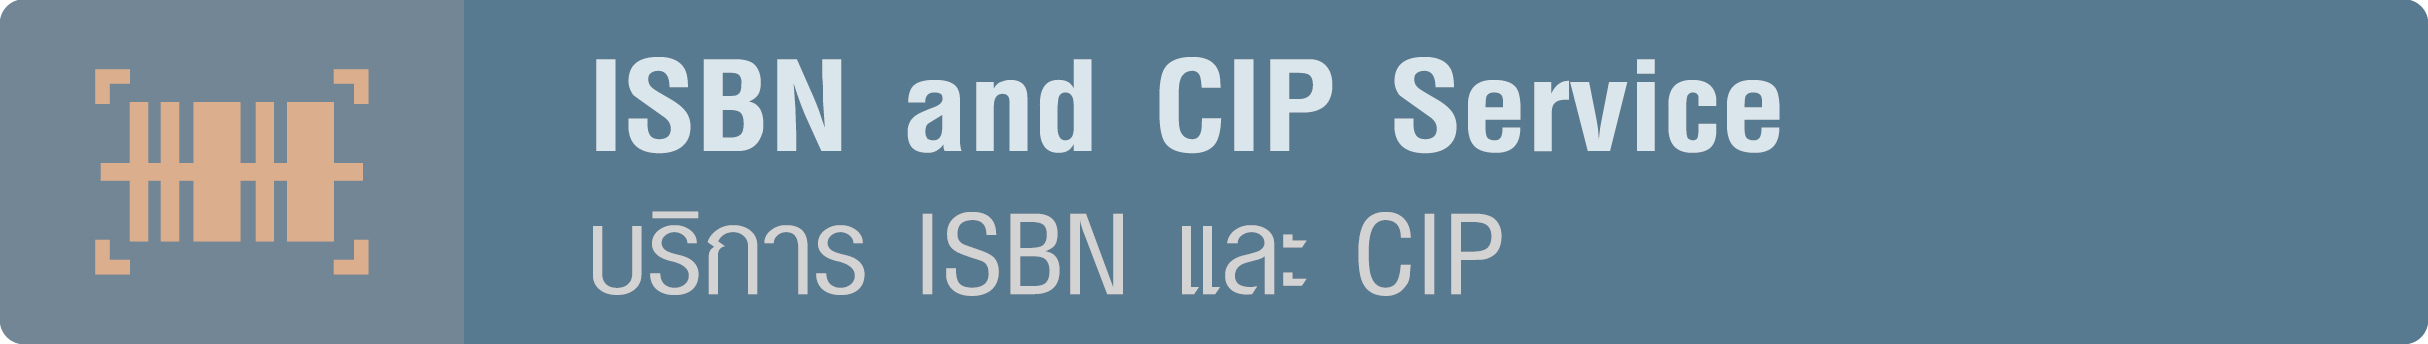 ISBN and CIP Service